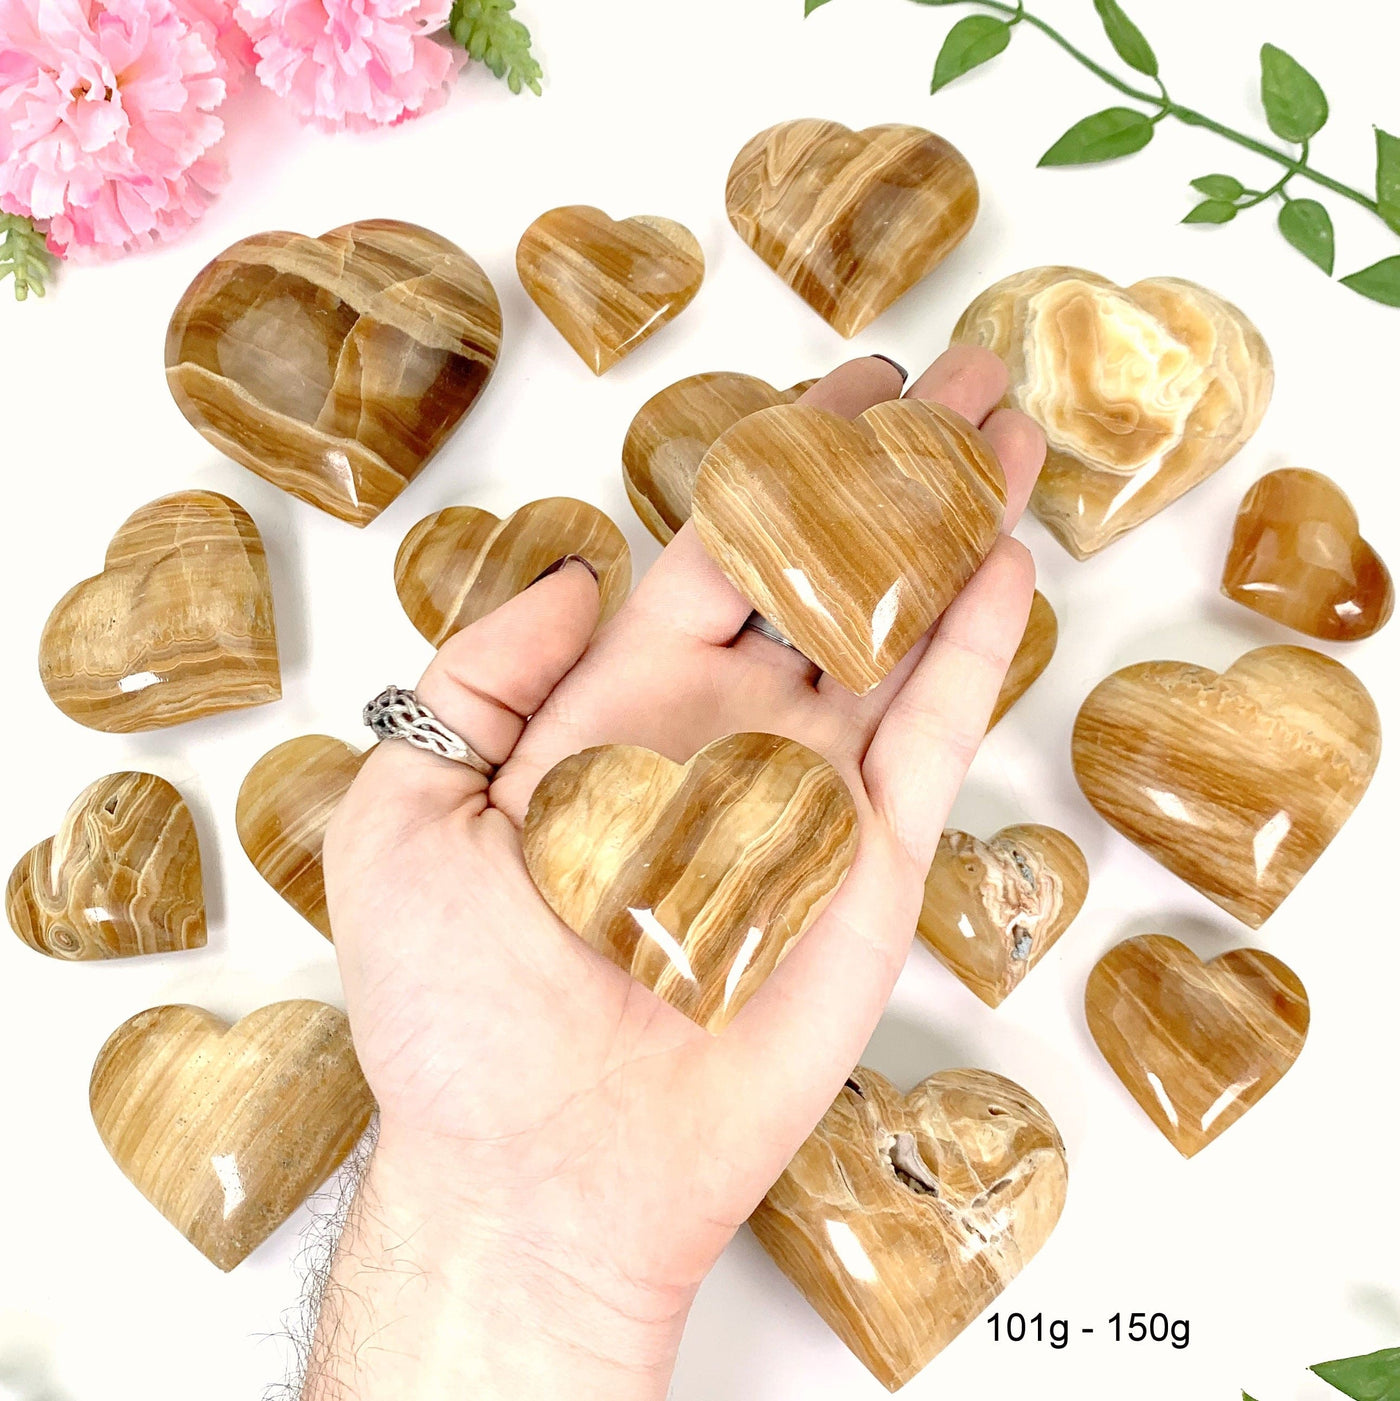 2 101 gram - 150 gram hearts in hand with a white background